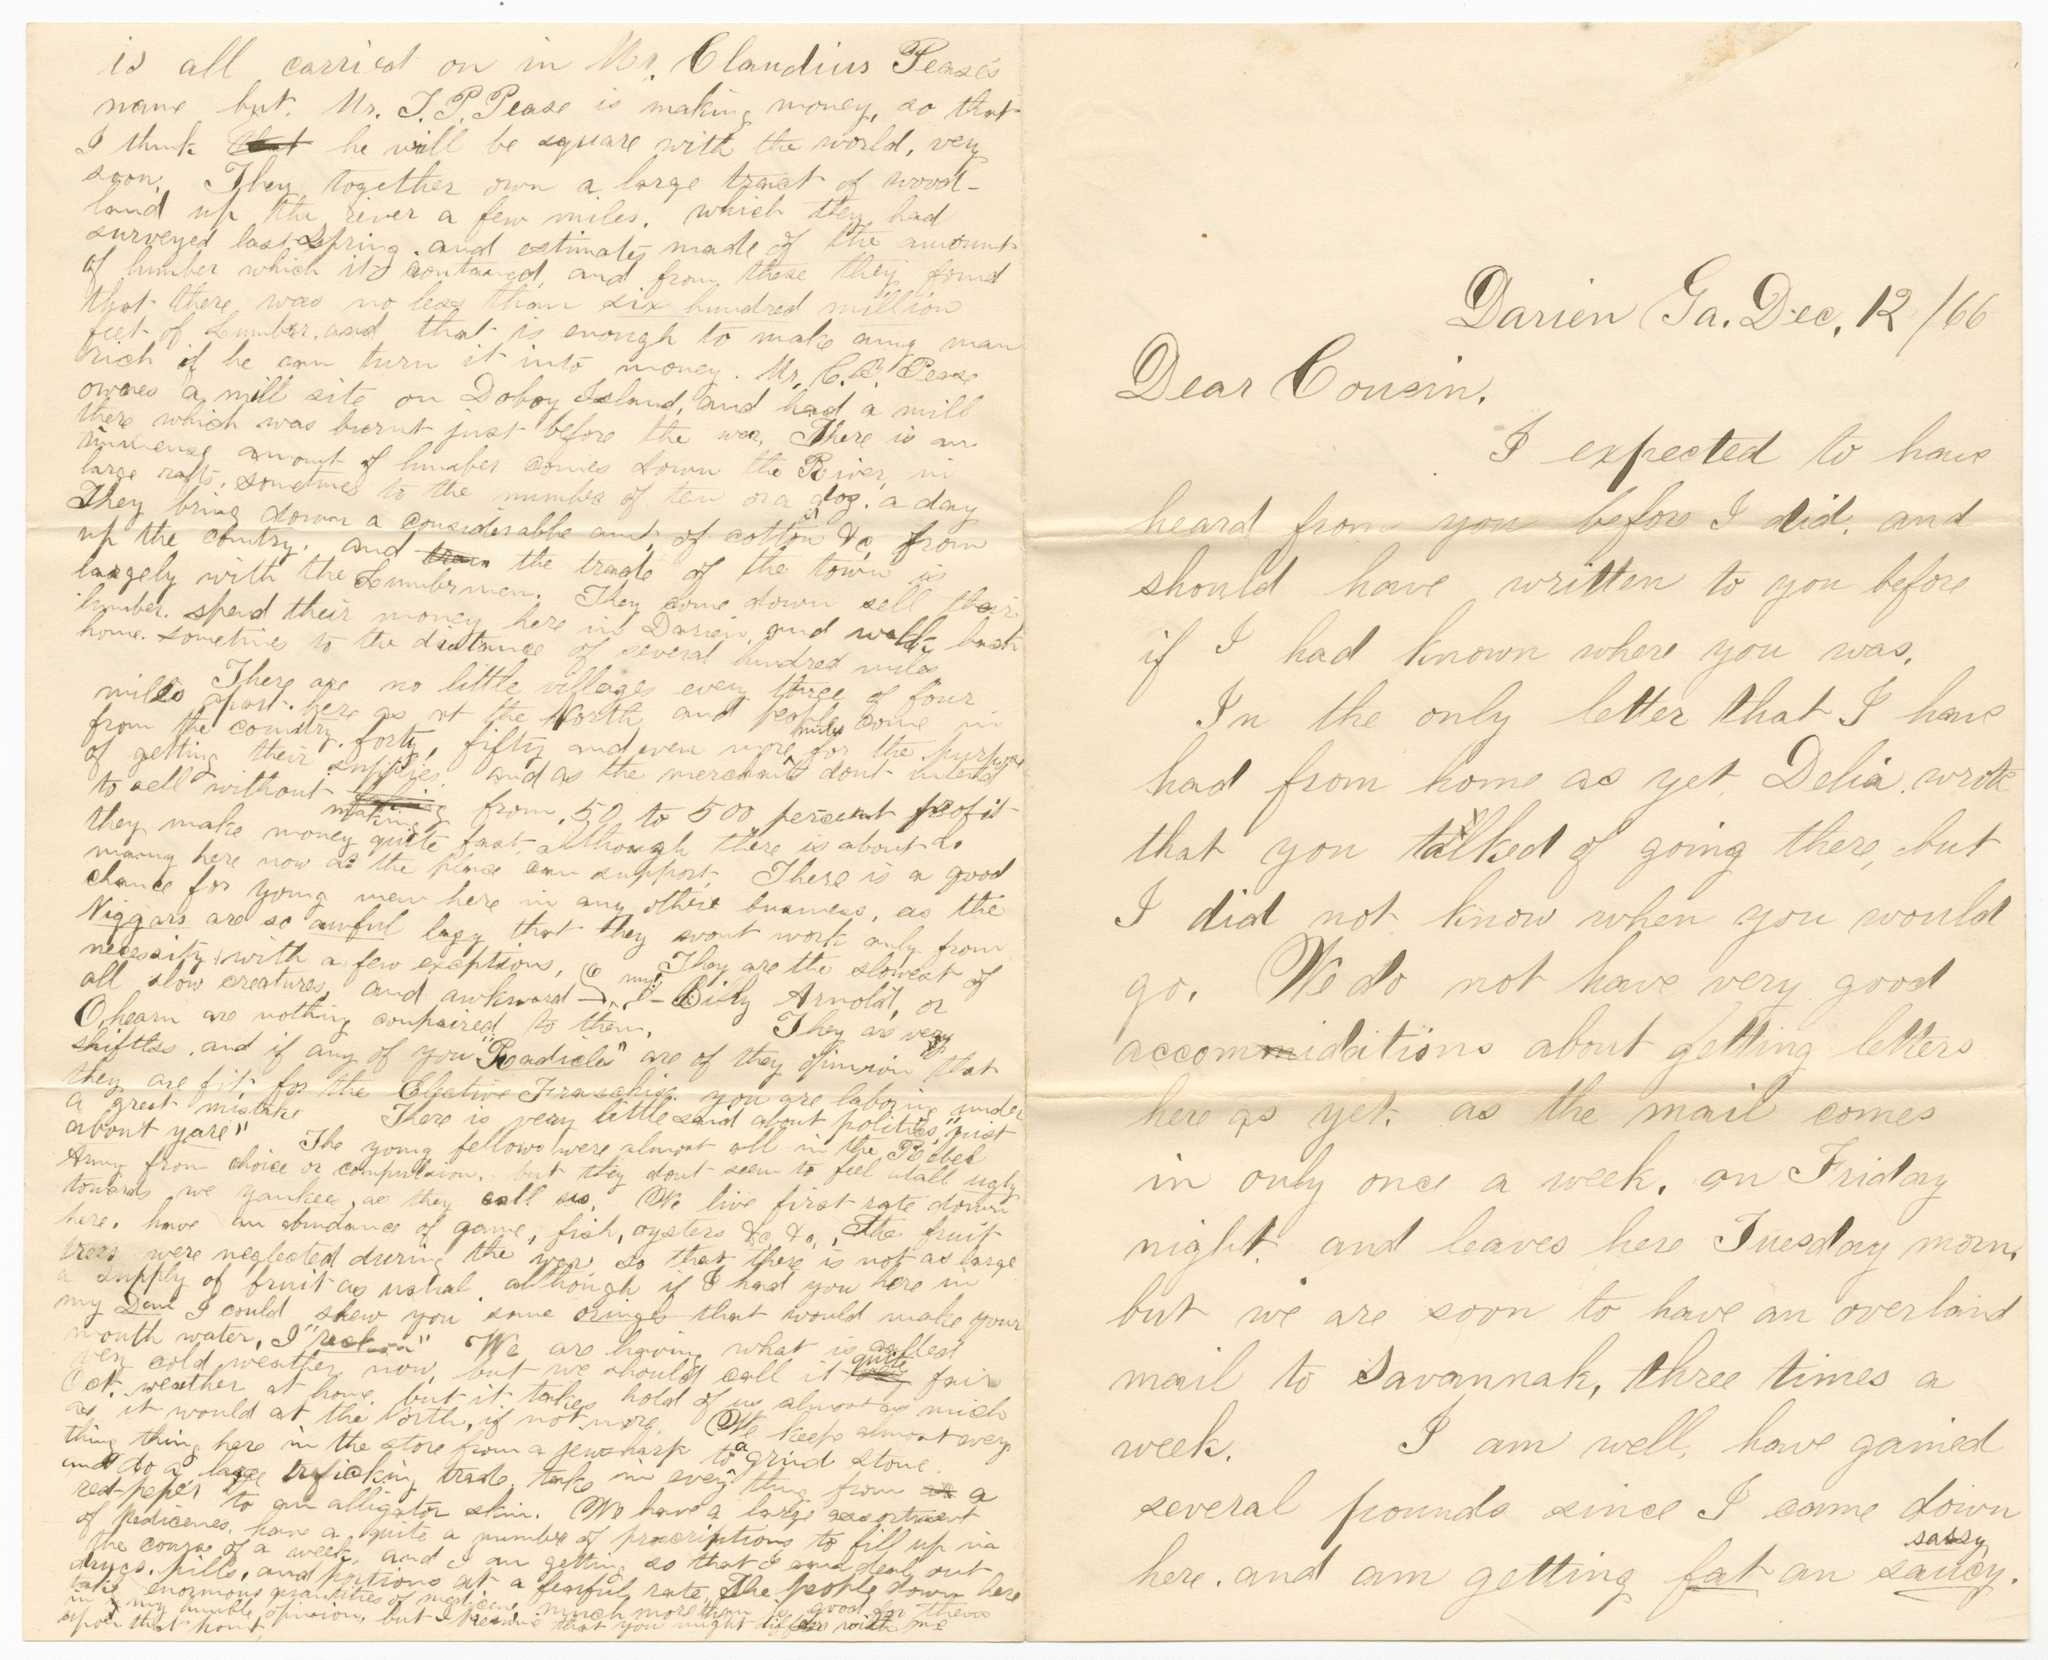 A handwritten letter concerning the actions of the 54th Massachusetts during the Civil War, written on both sides of a single sheet of paper, folded to form four pages. This letter is addressed to "cousin" but remains unsigned. The writer gives a brief description of his circumstances after his recent arrival in Darien, GA with his regiment, claiming he's gotten "fat and sassy" since joining the army. He discusses the actions of the 54th Massachusetts, U.S. Colored troops in the town, describing a scene of general destruction and absent town dwellers. The first three pages are written in a steady, consistent hand; the last page is written by the same author but in a very cramped, tiny script. Near the top of the center fold separating the pages is an embossed, slightly raised symbol of an American shield.